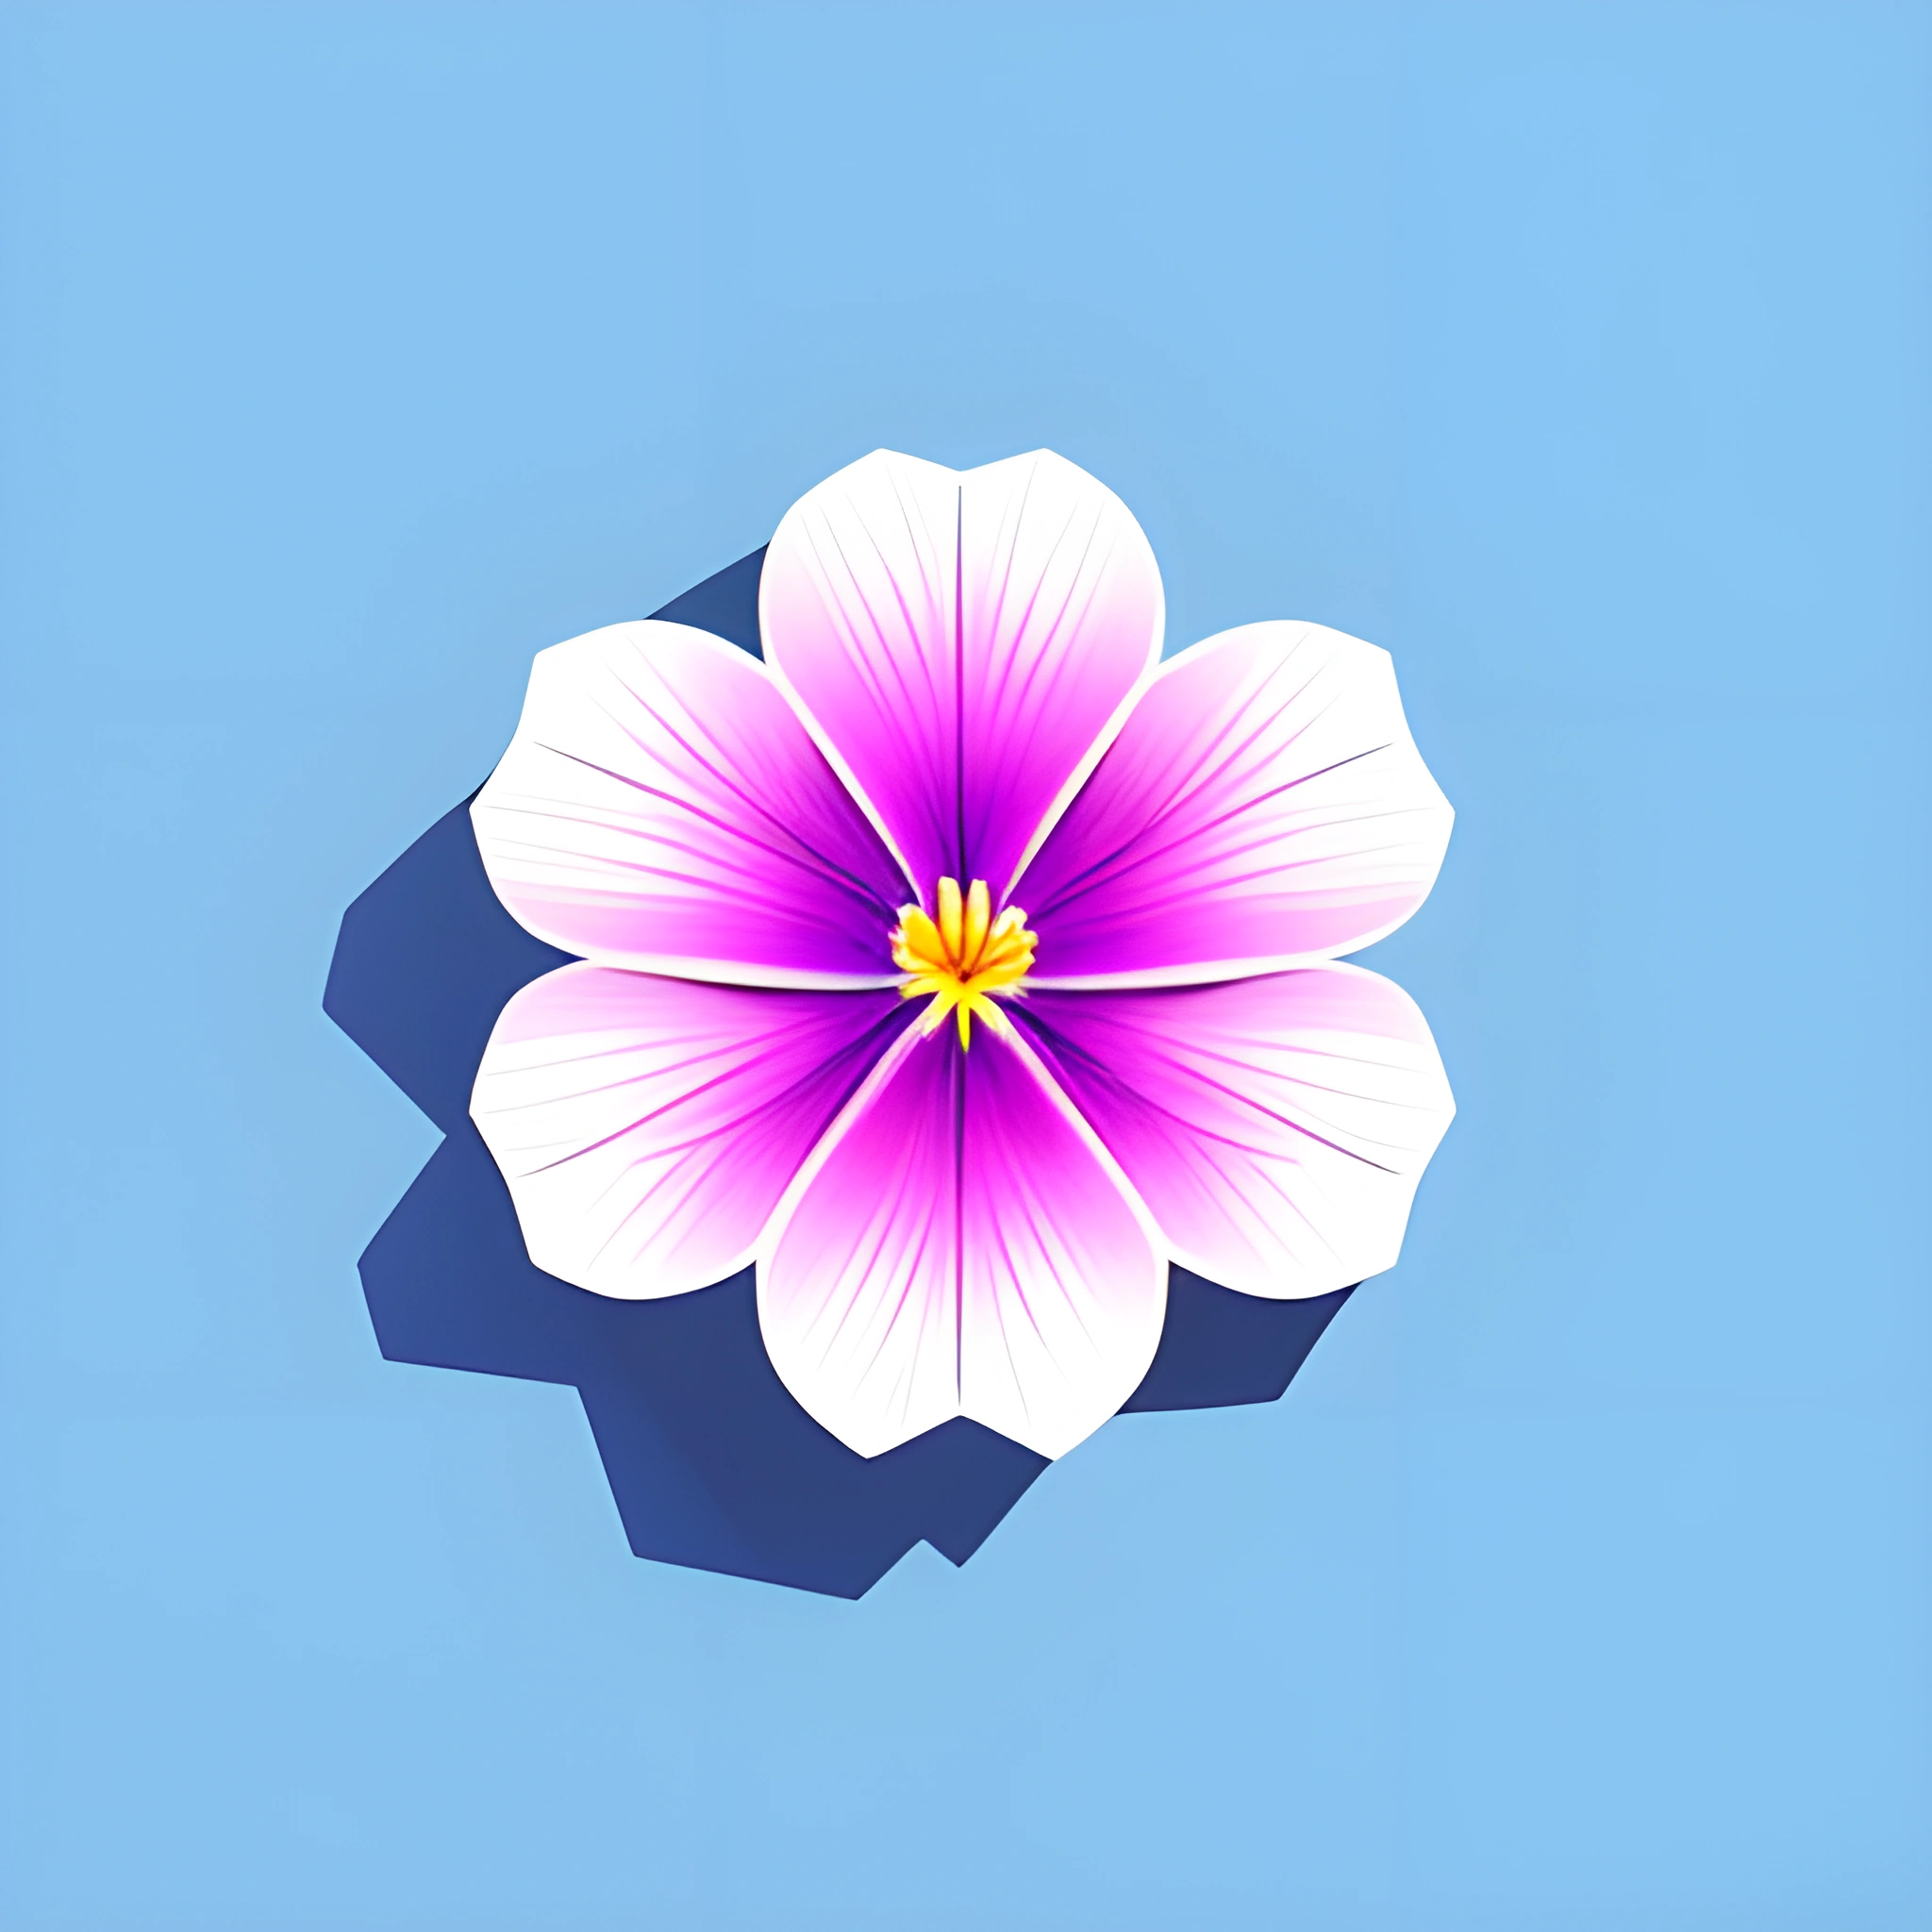 purple flower on a blue background with a shadow